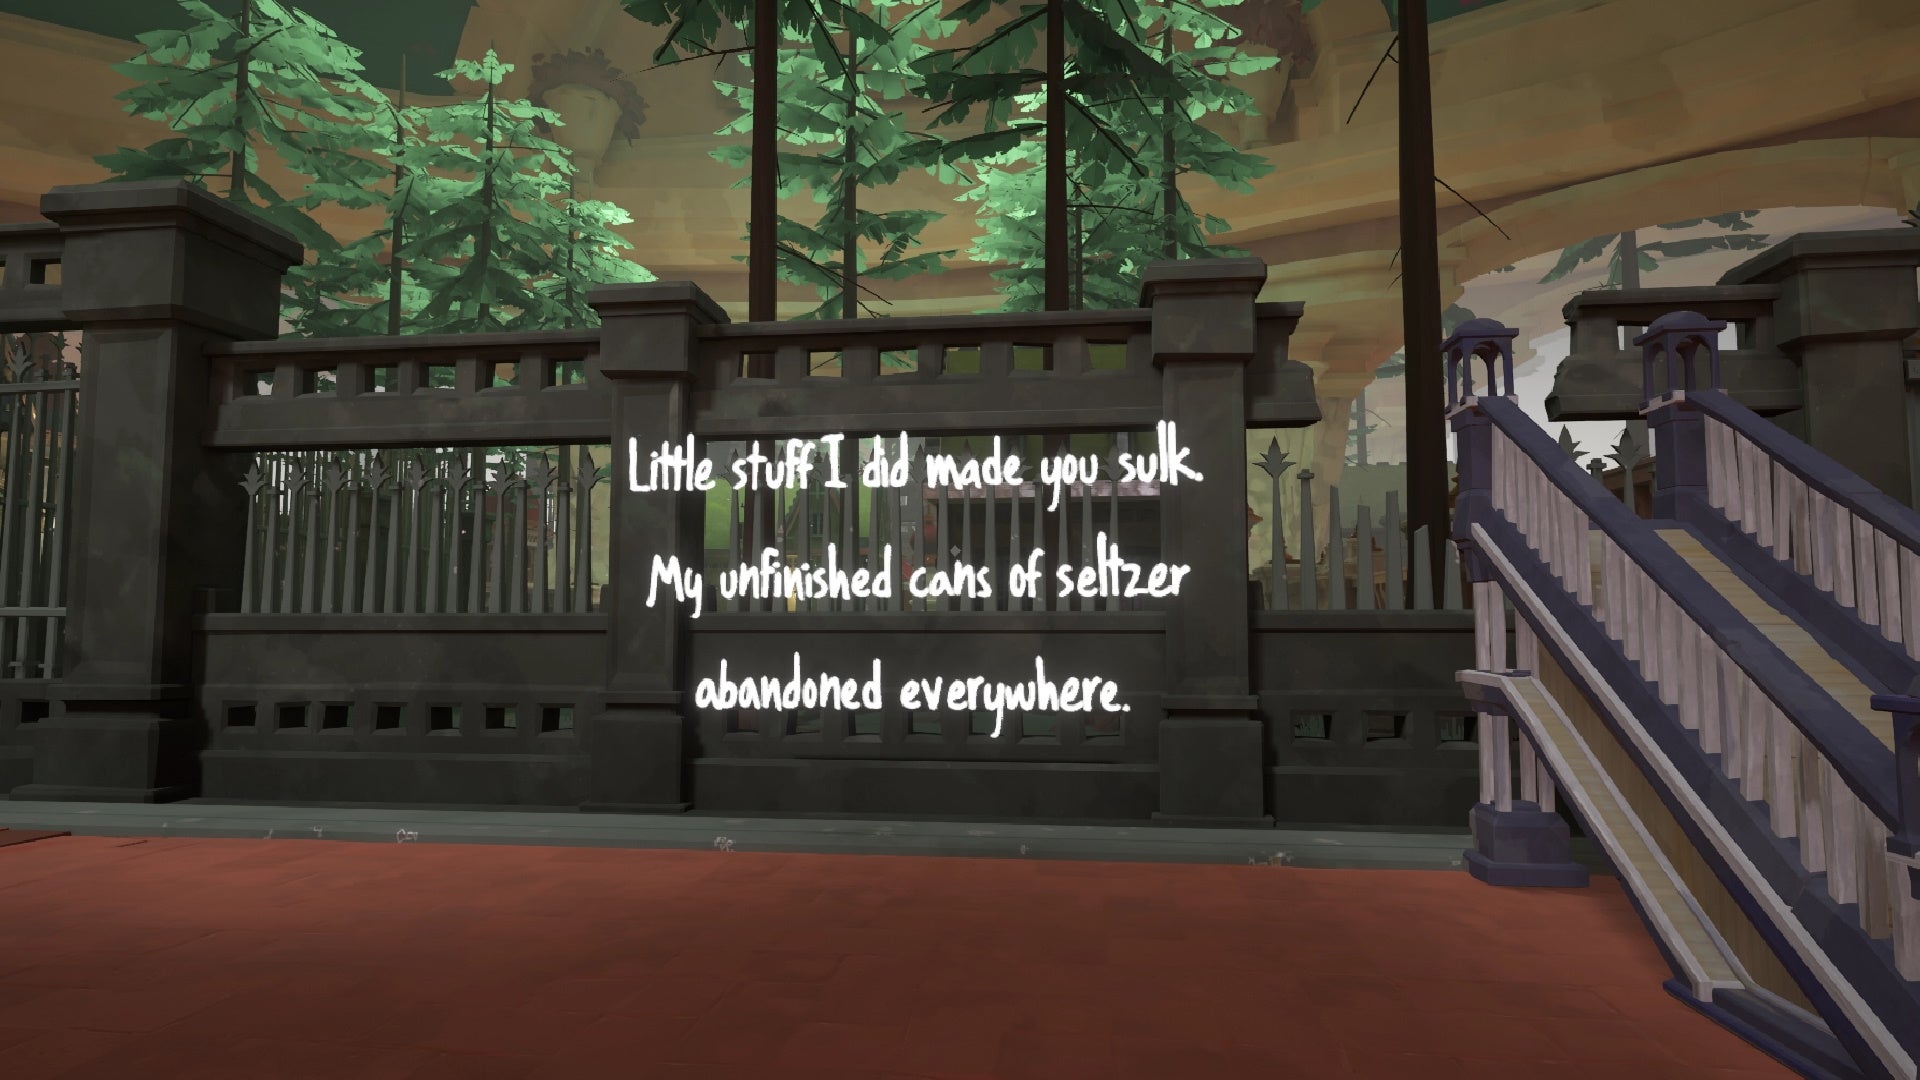 A screenshot of Maquette which shows more dialogue. This time it reads "Little stuff I did made you sulk. My unfinished cans of seltzer abandoned everywhere."